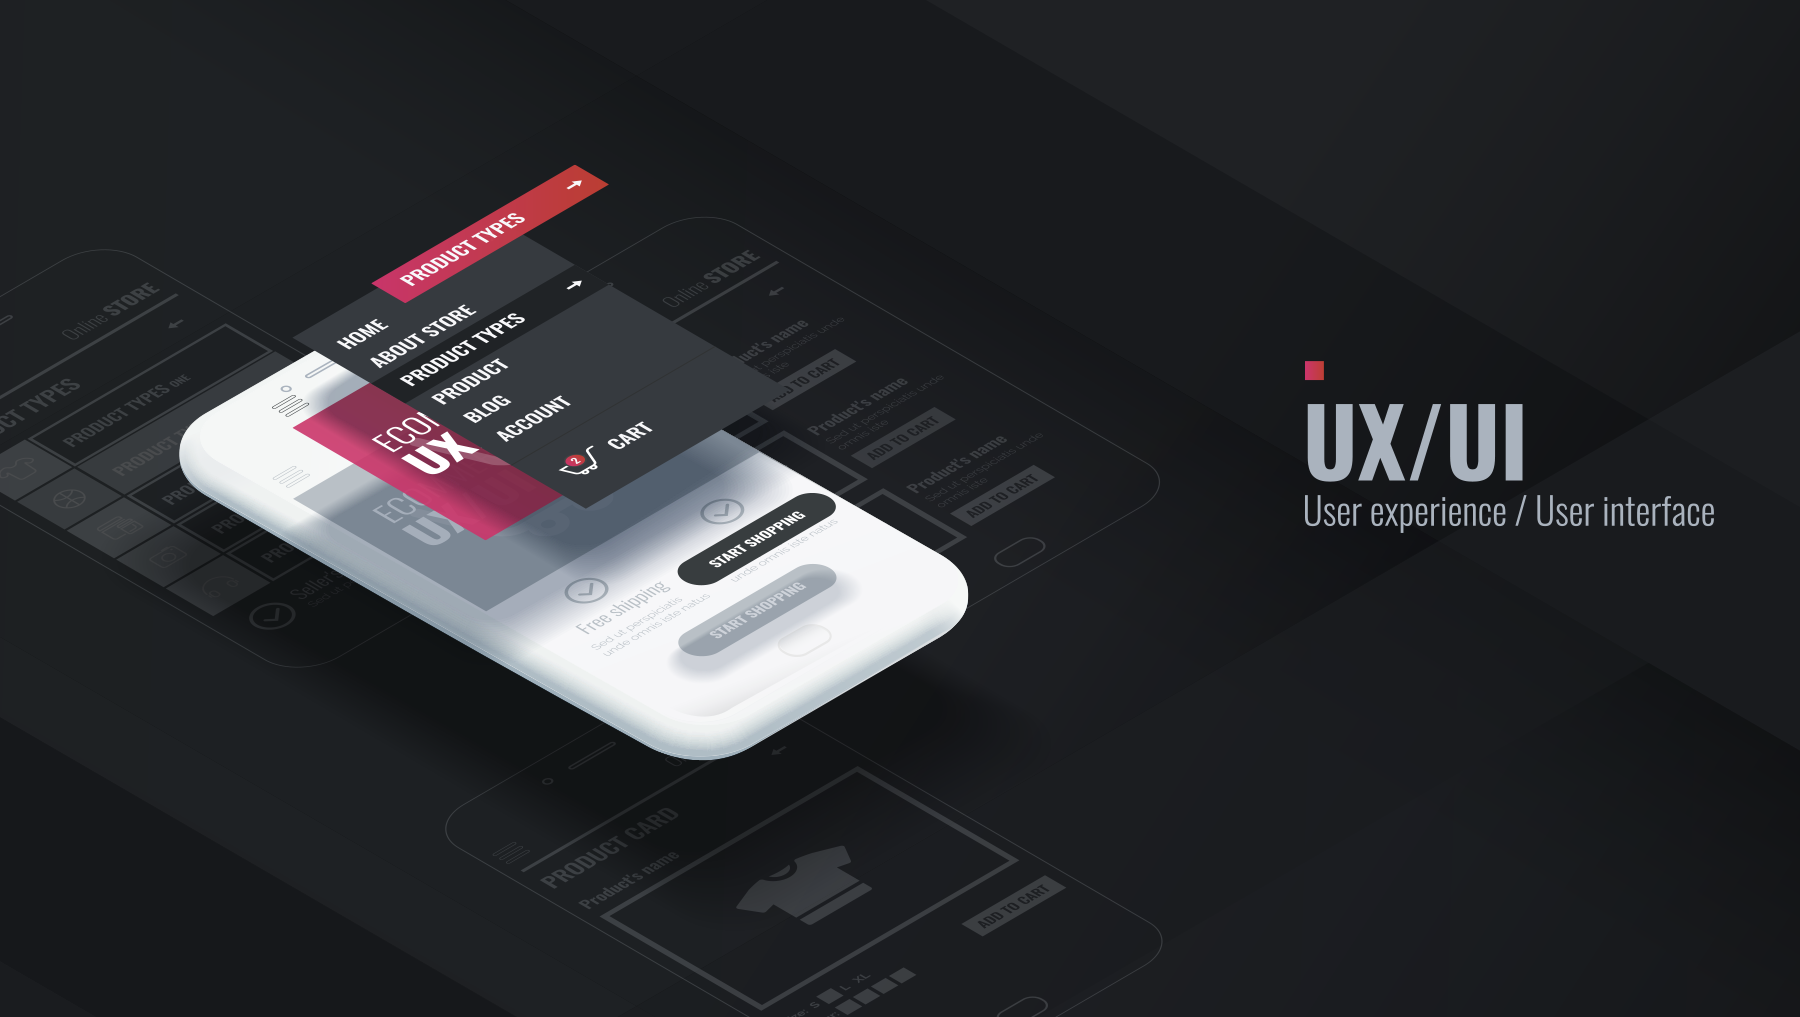 What the UI/UX Workflow is Like and Why is It Awesome